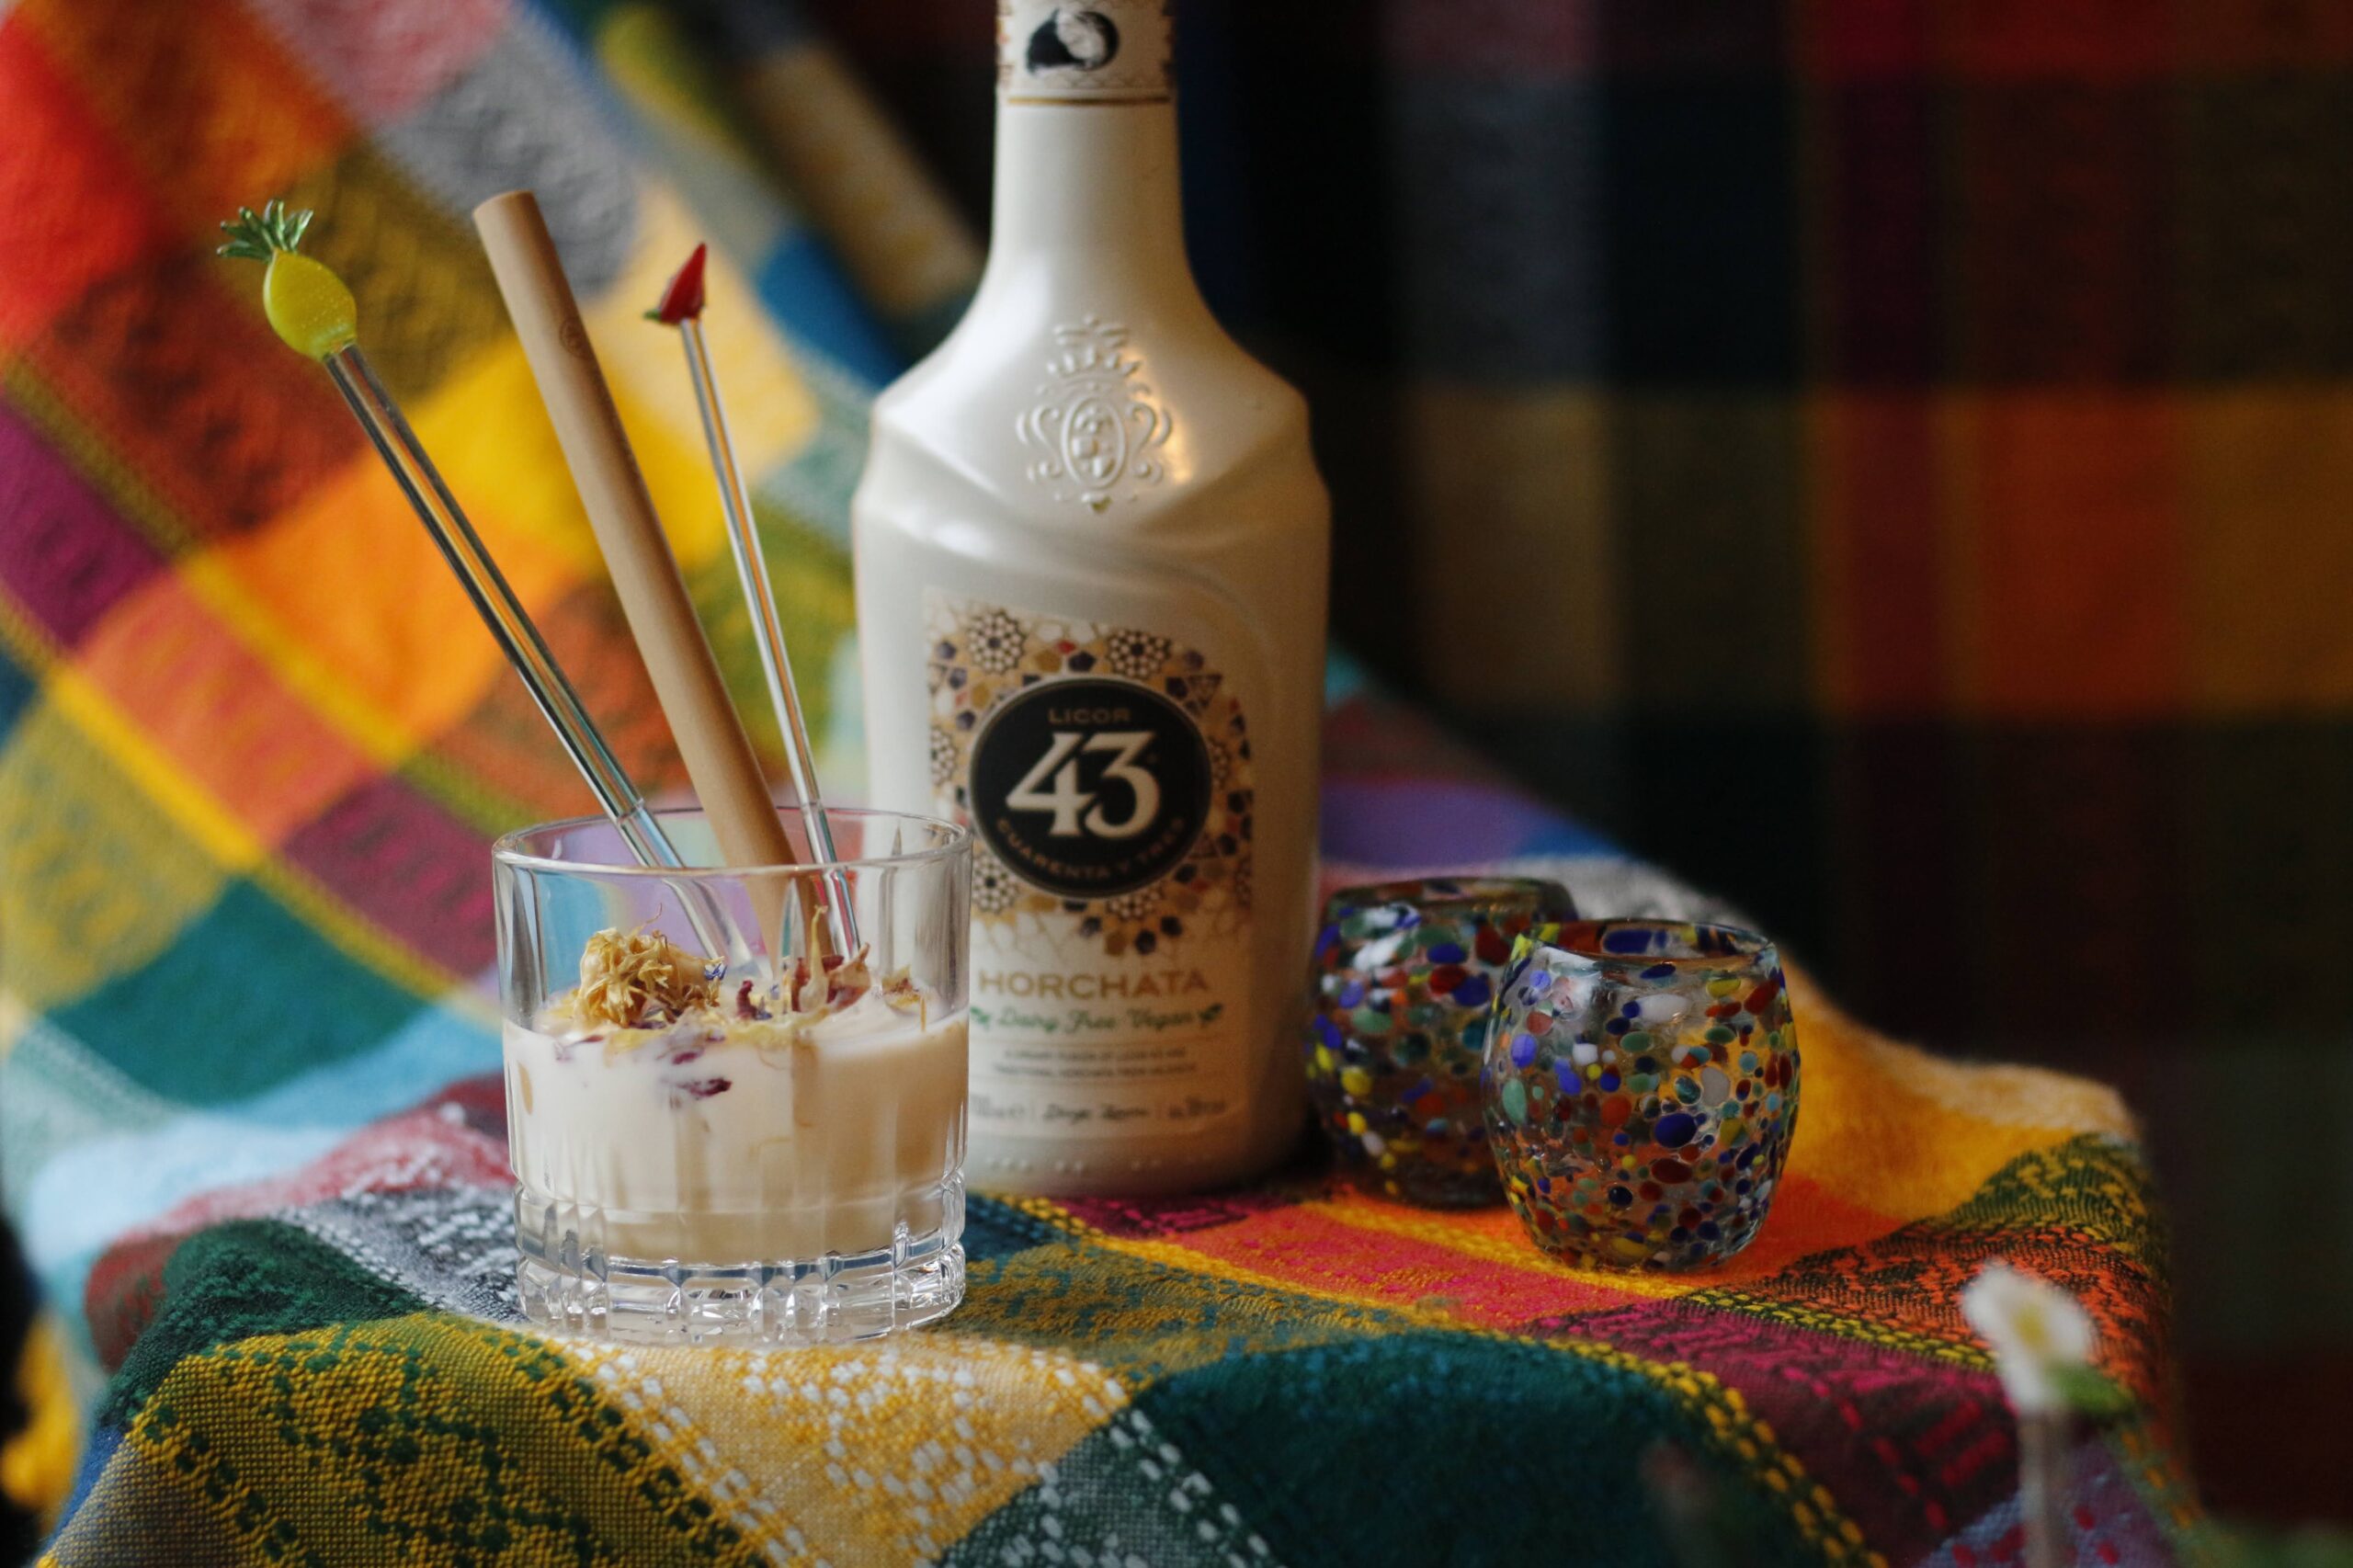 About Licor 43 Horchata